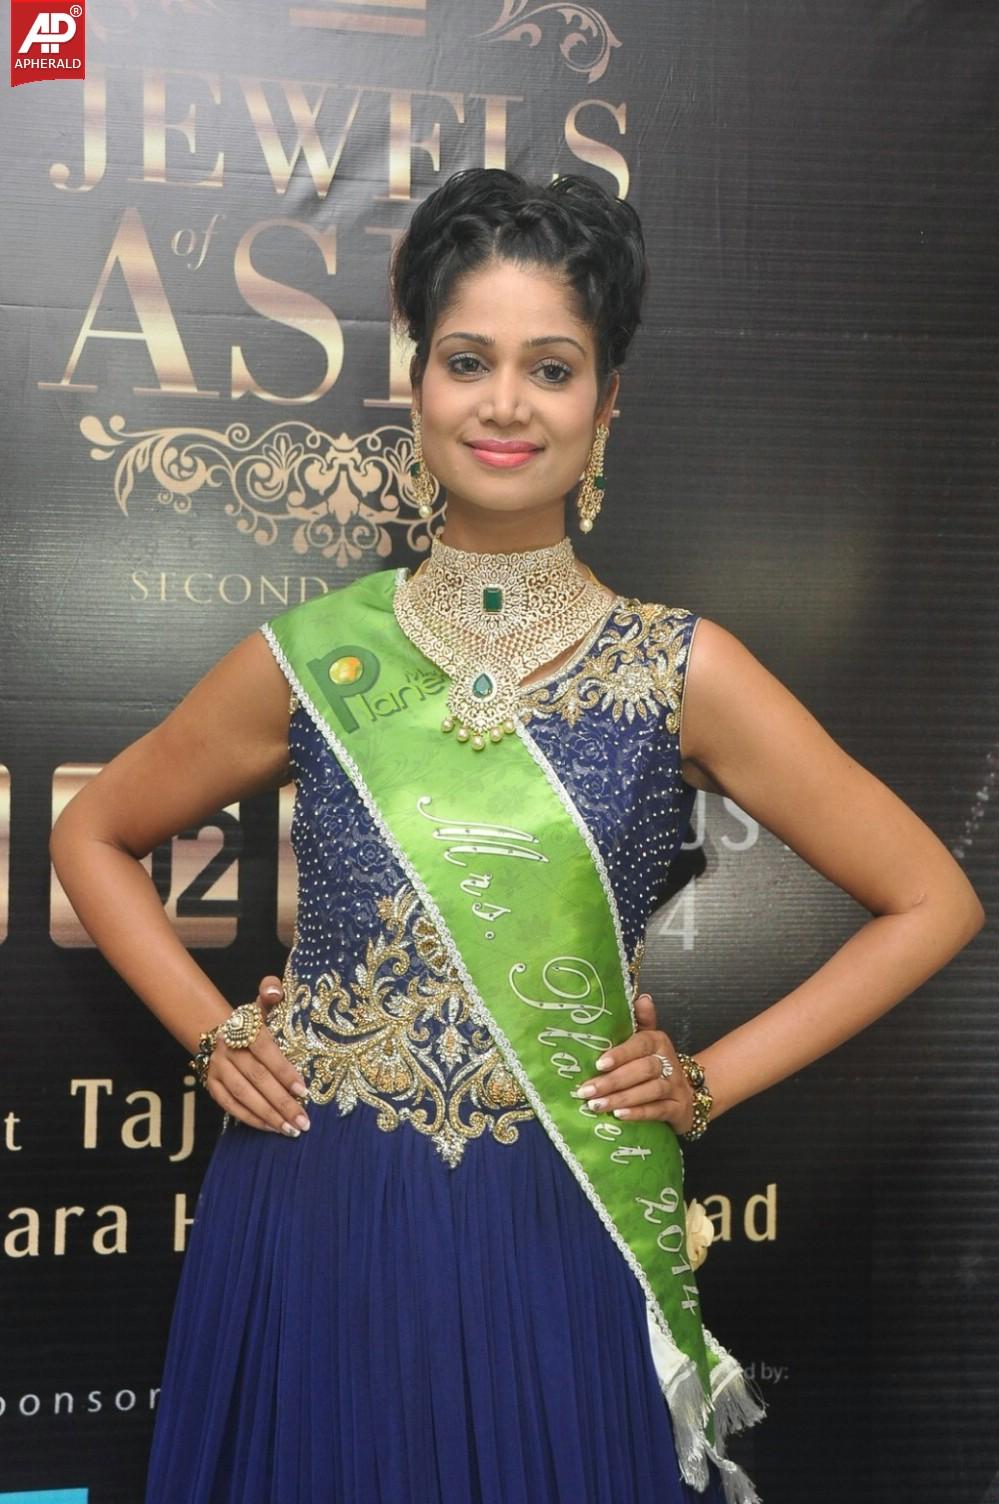 Celebs at Jewels of Asia Event